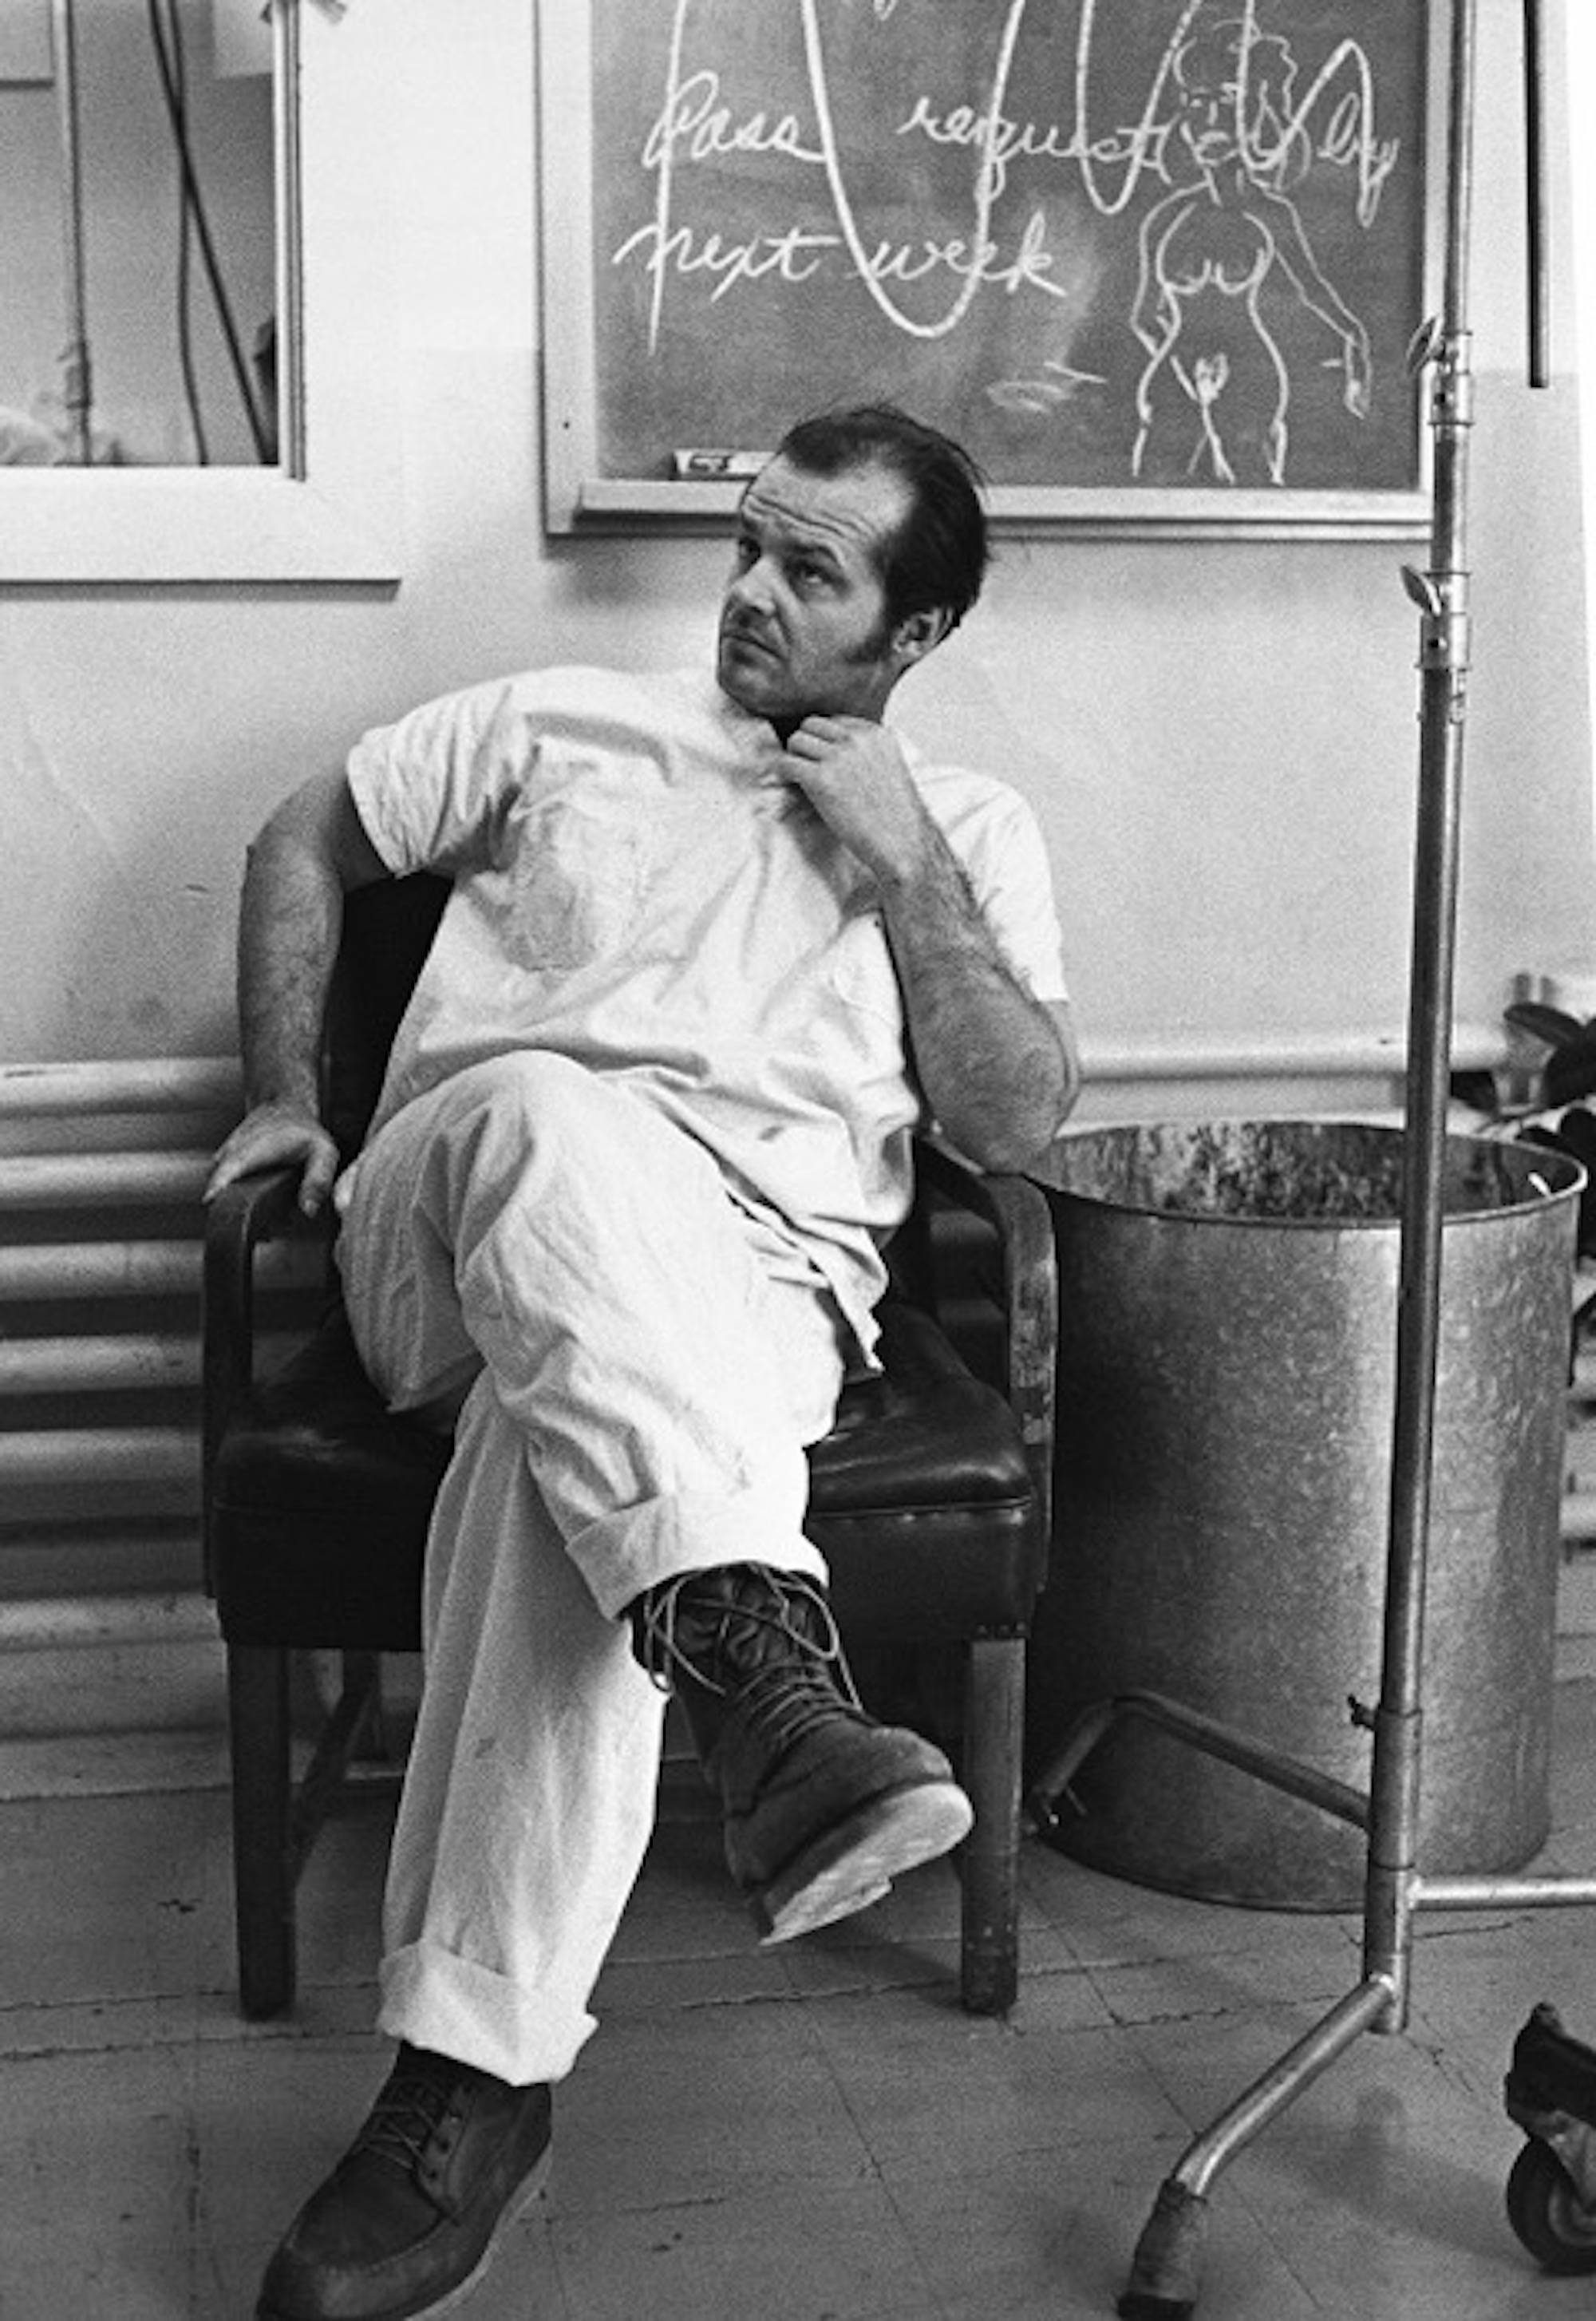 Peter Sorel Black and White Photograph - Jack Nicholson, 1974 (from One Flew Over the Cuckoo's Nest)